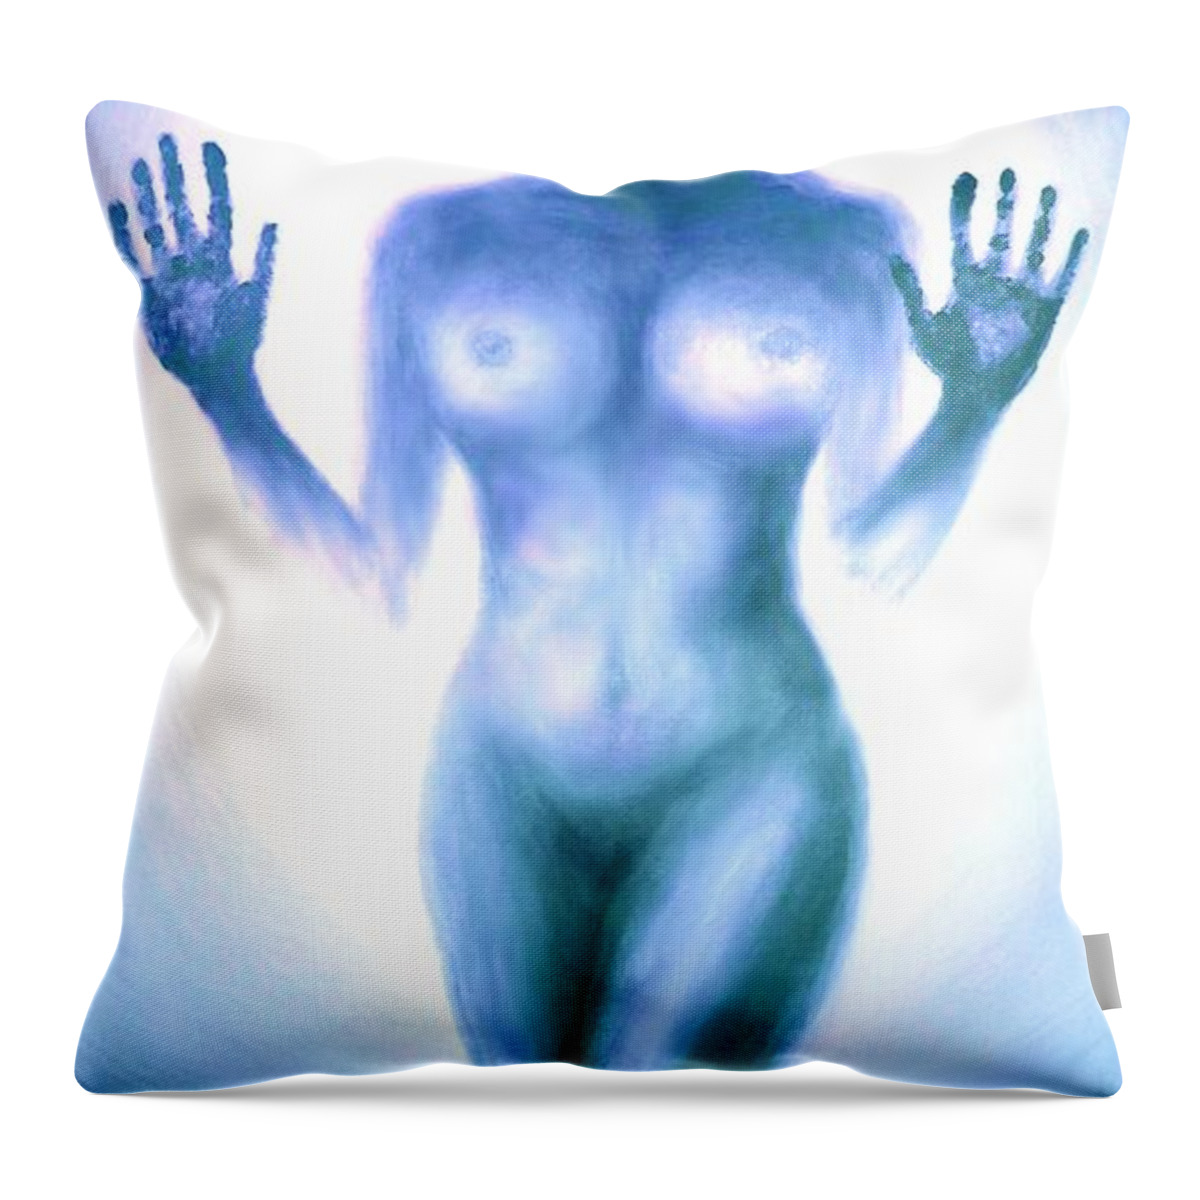 Original Art Throw Pillow featuring the photograph Outsider series - Trapped behind the glass - in blue by Lilia S